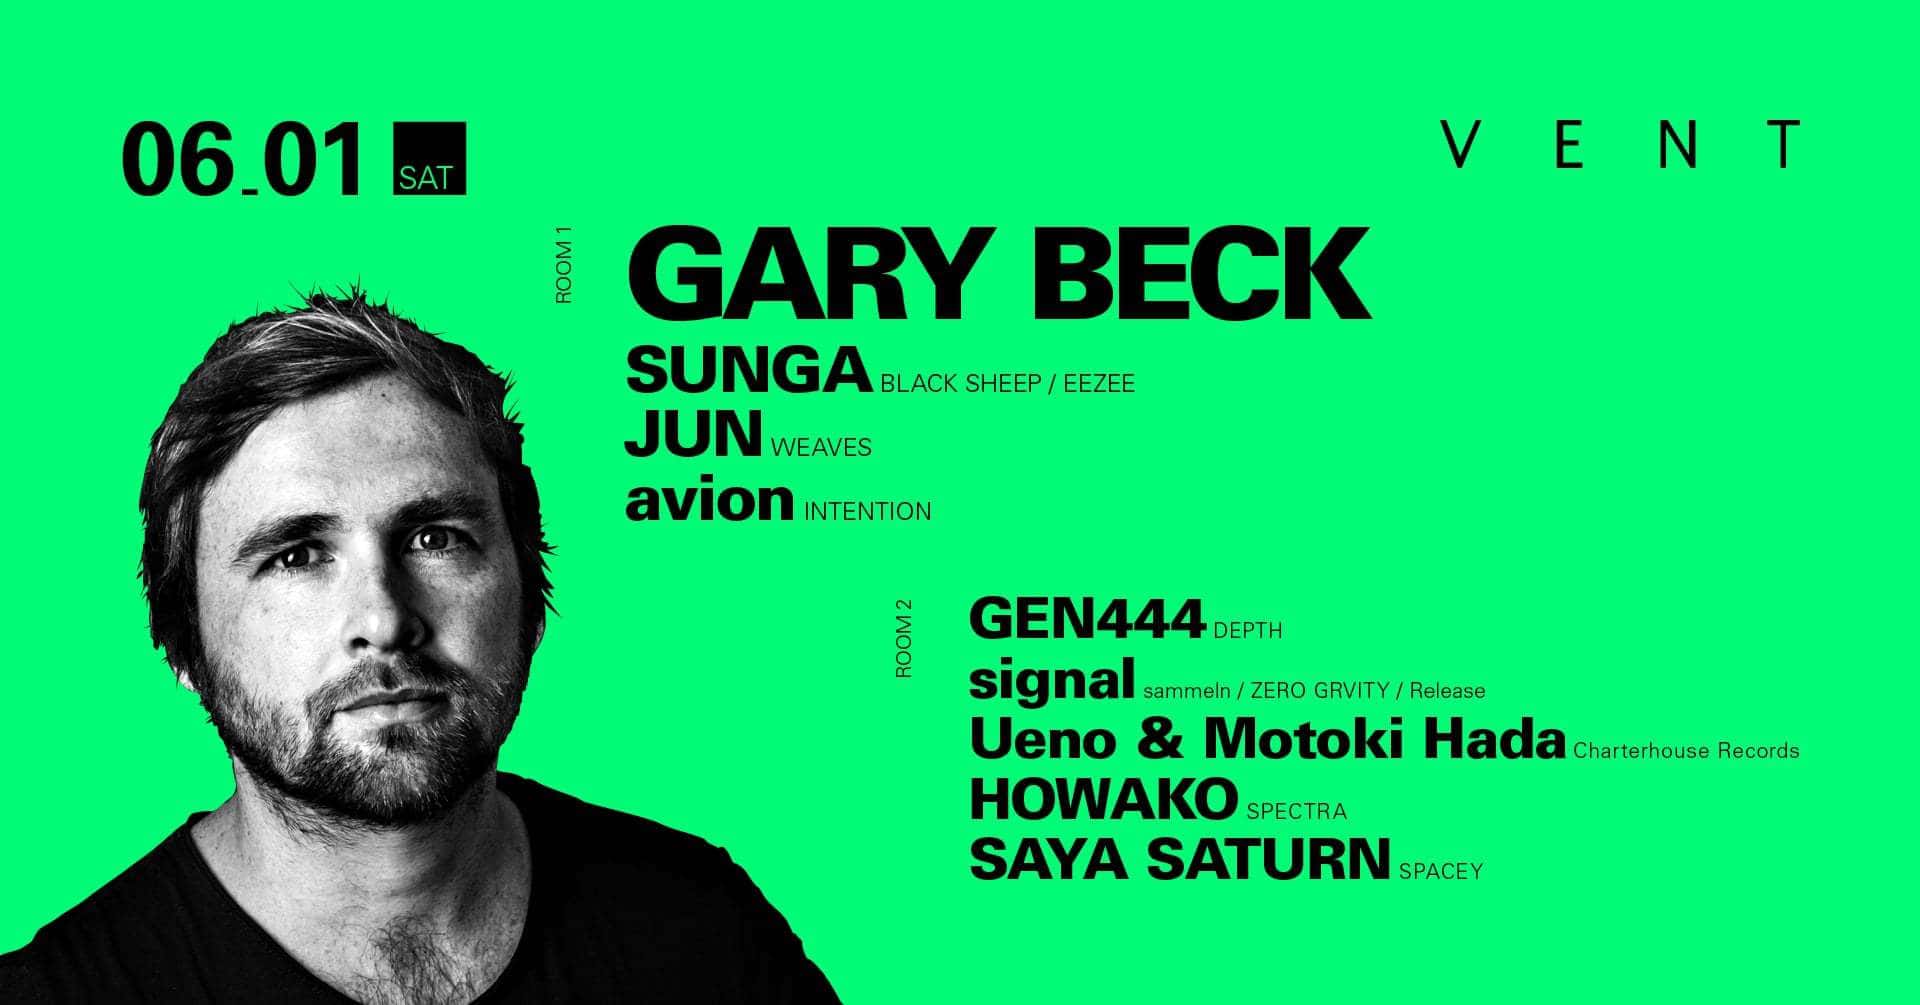 Gary Beck comes to nightclub VENT Omotesando on June 1st!